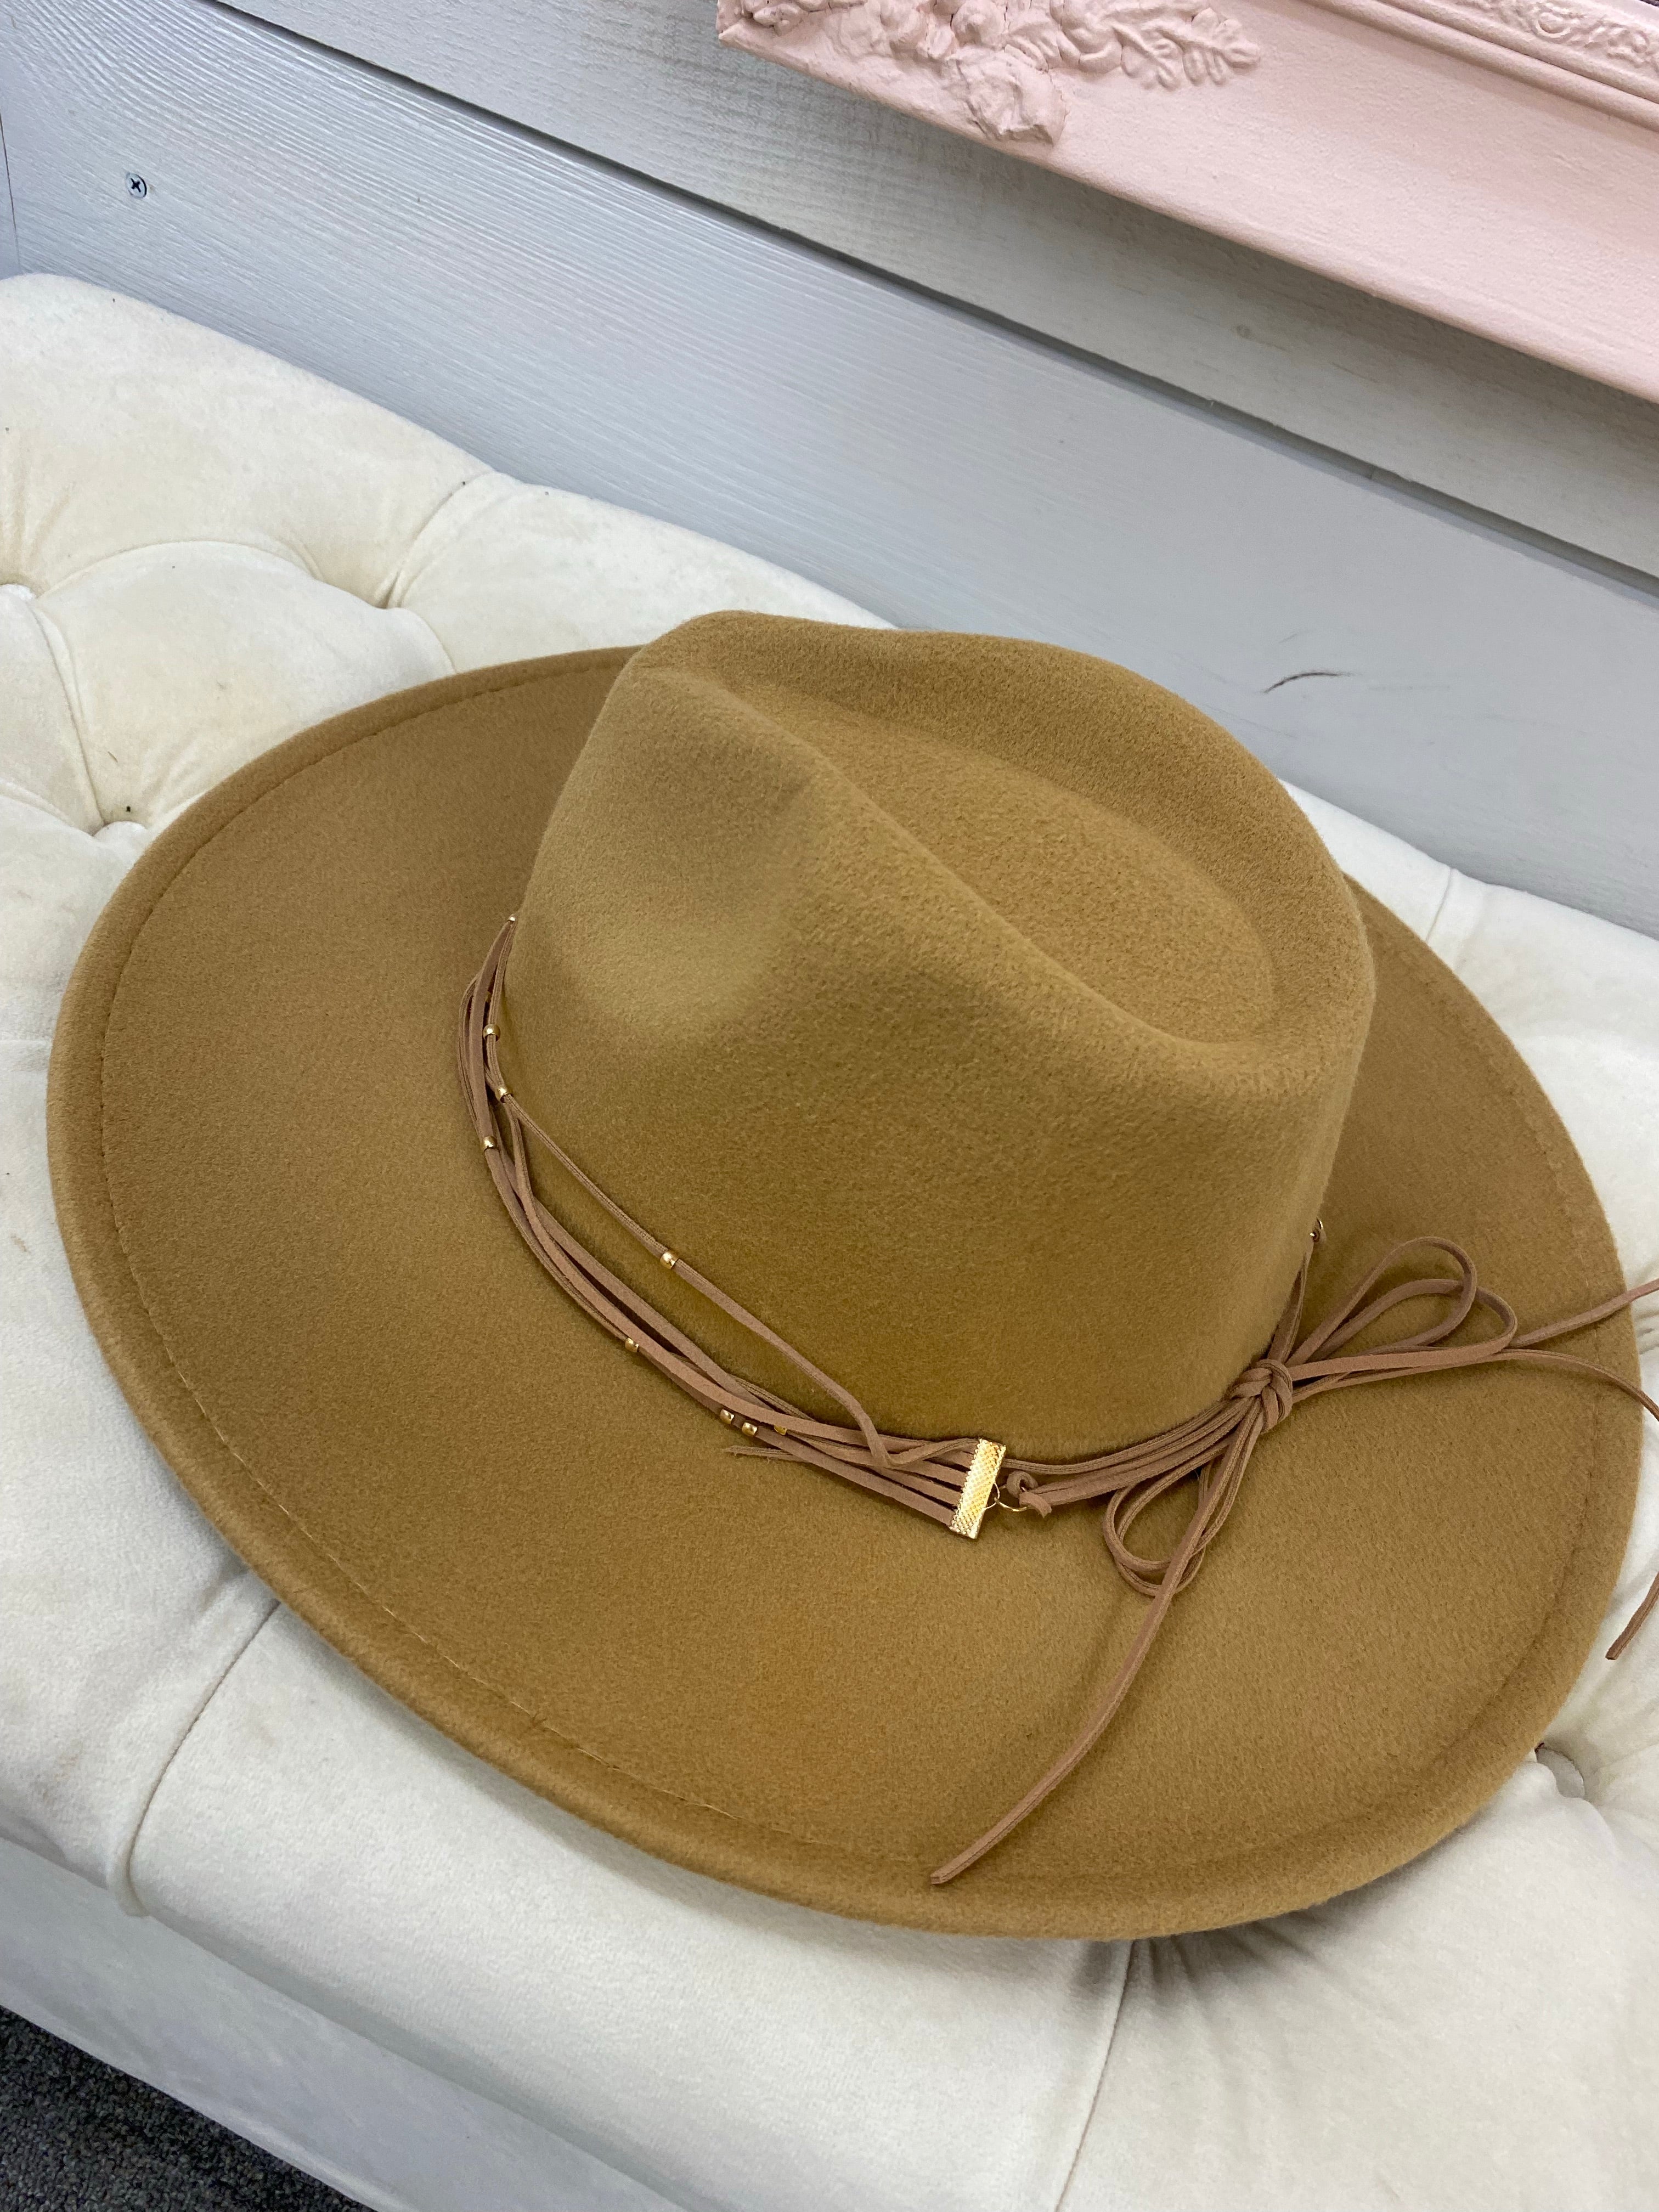 Women’s Felt Wide Brimmed Hats with Band